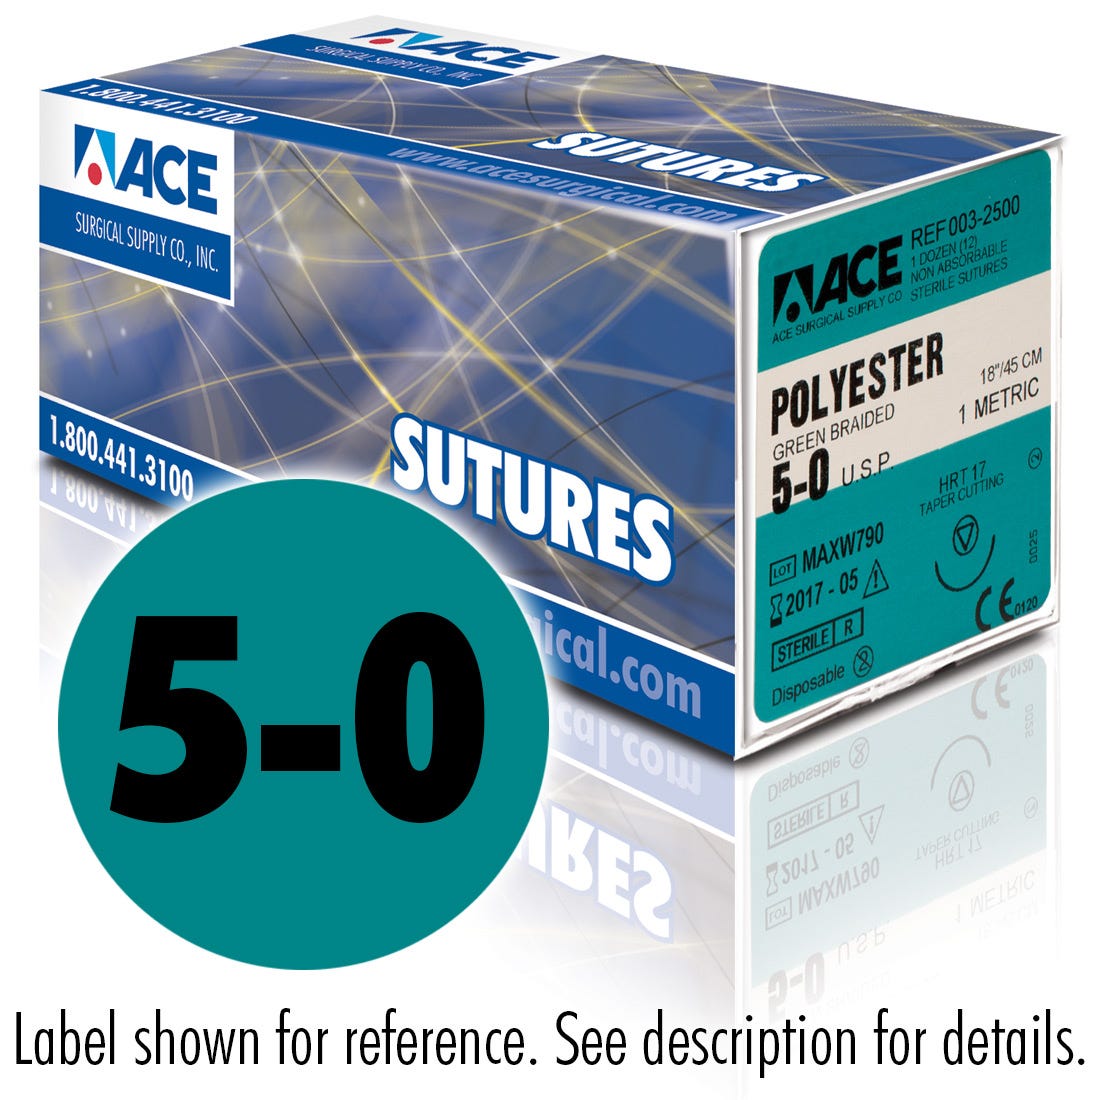 ACE 5-0 Green Braided Polyester Sutures, HRT17, 18"